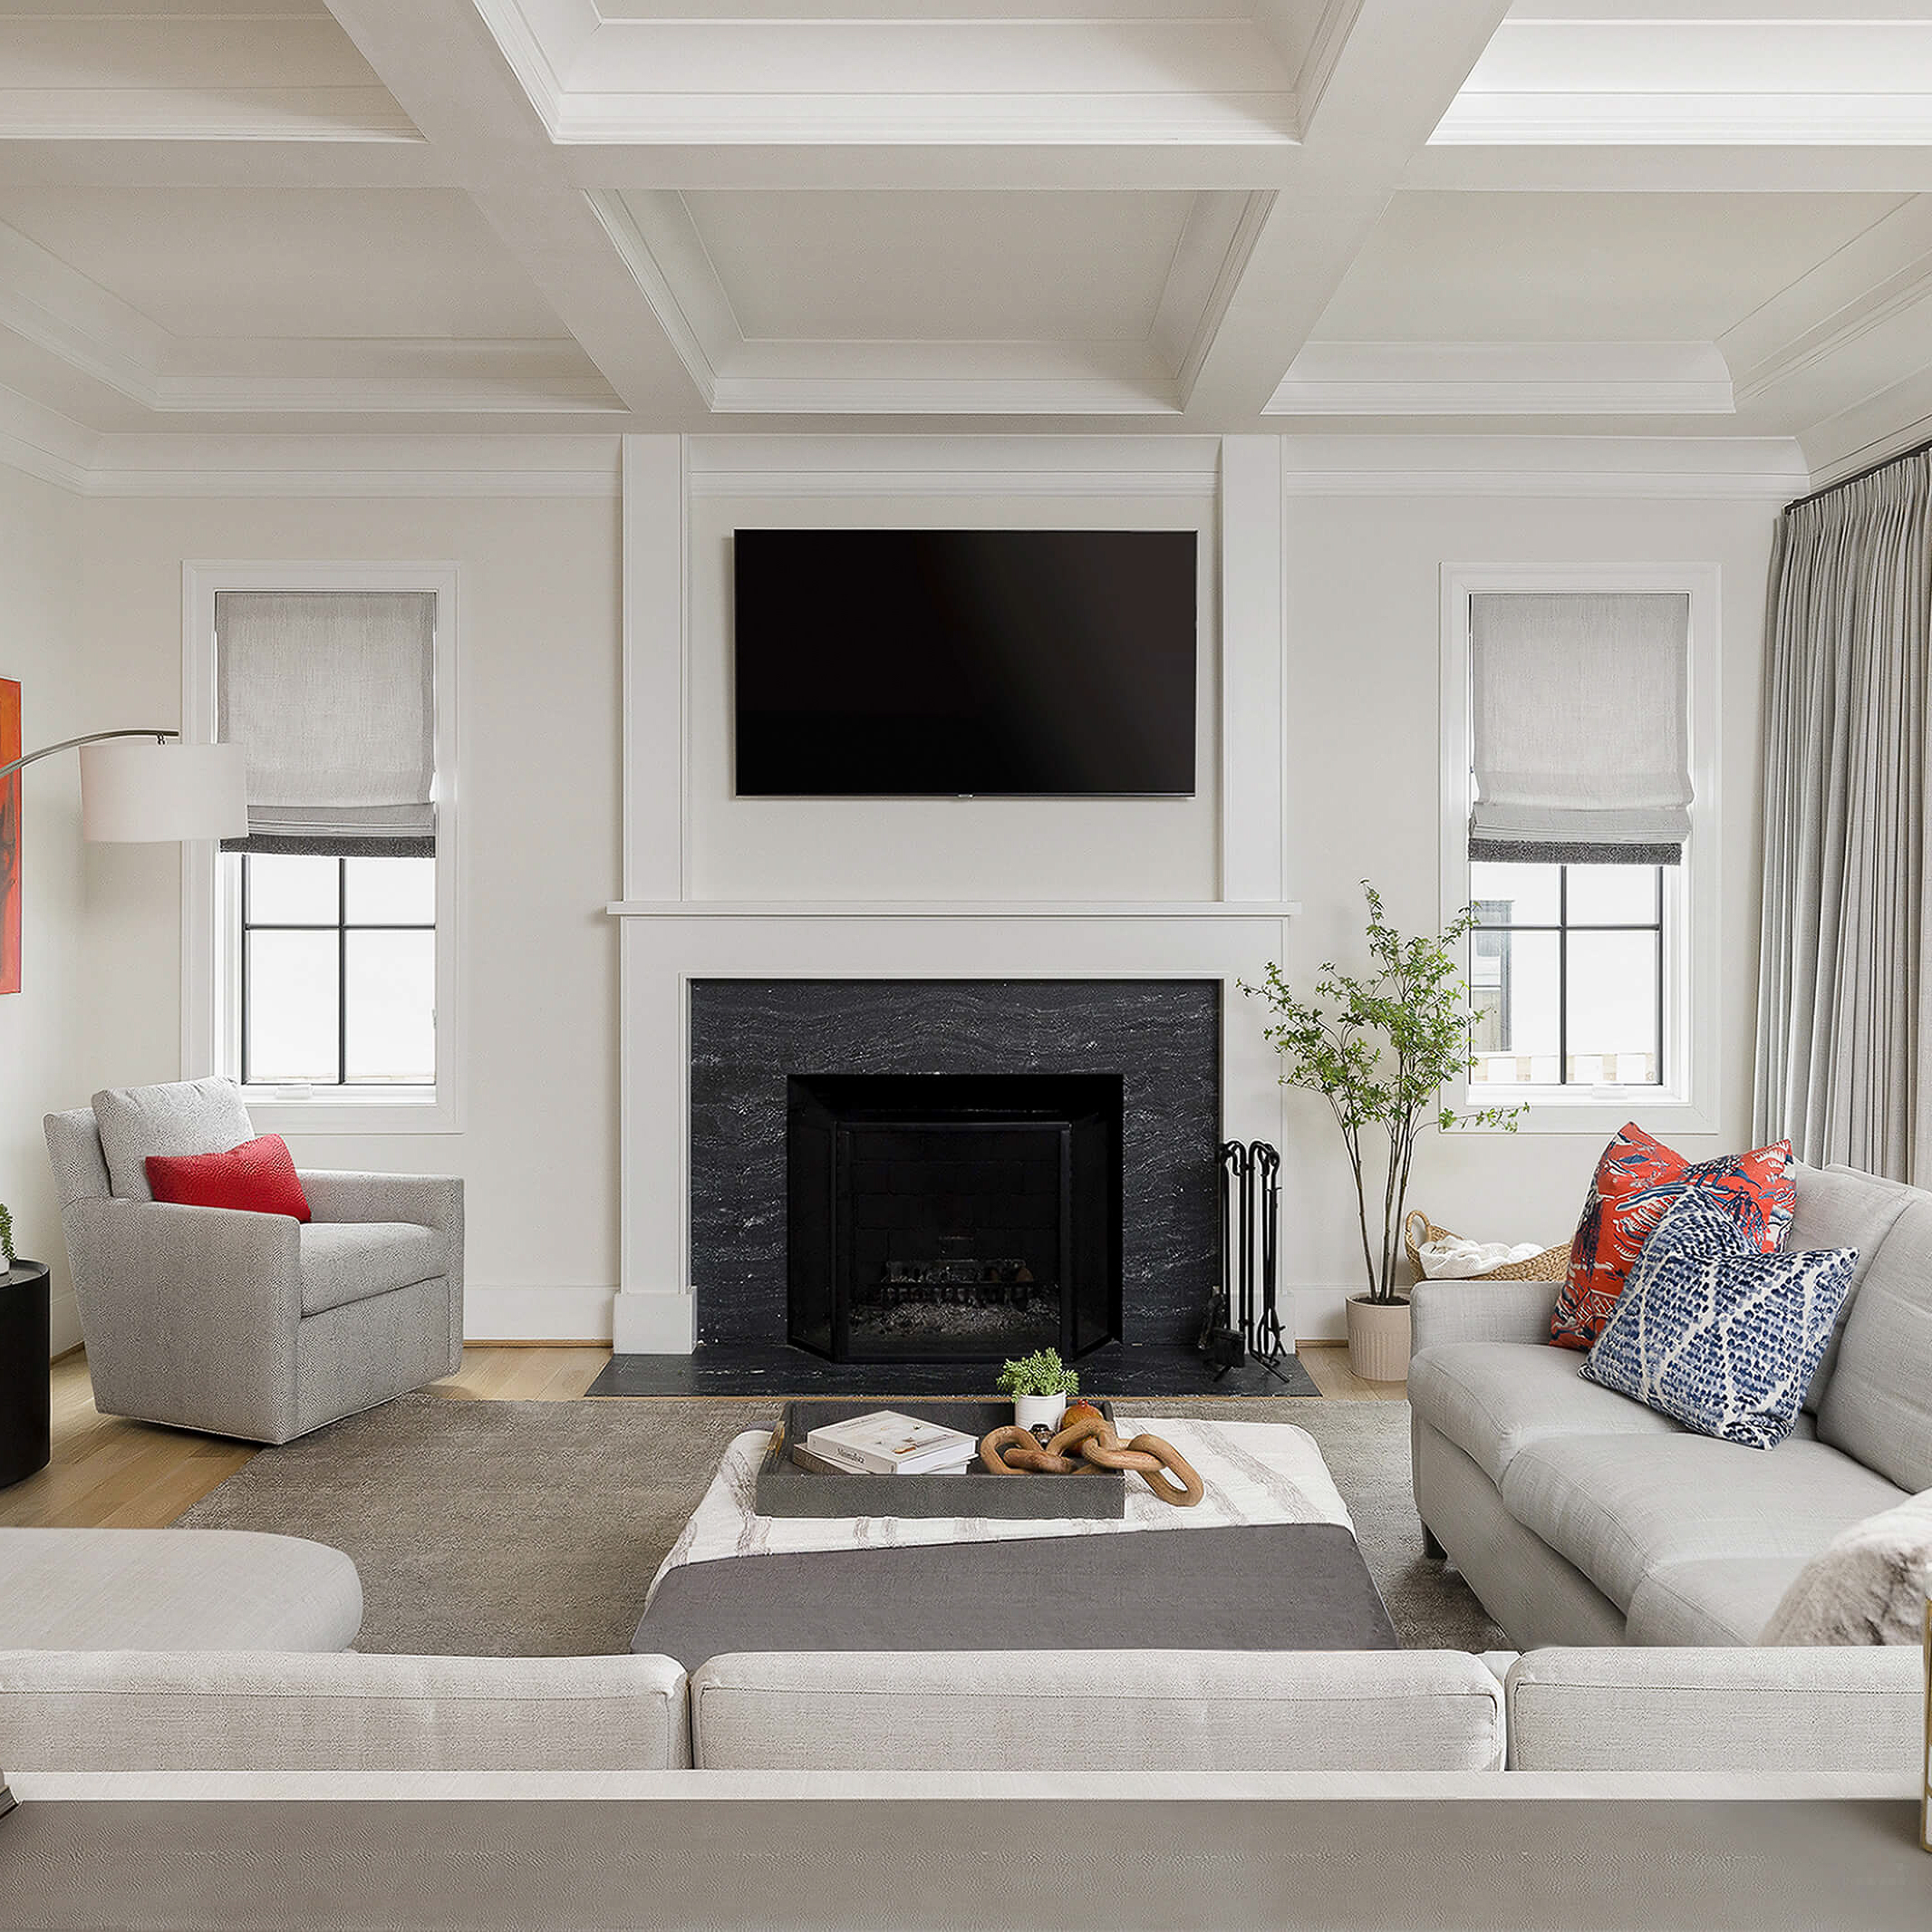 Custom home, transitional living room , red and blue accent pillows